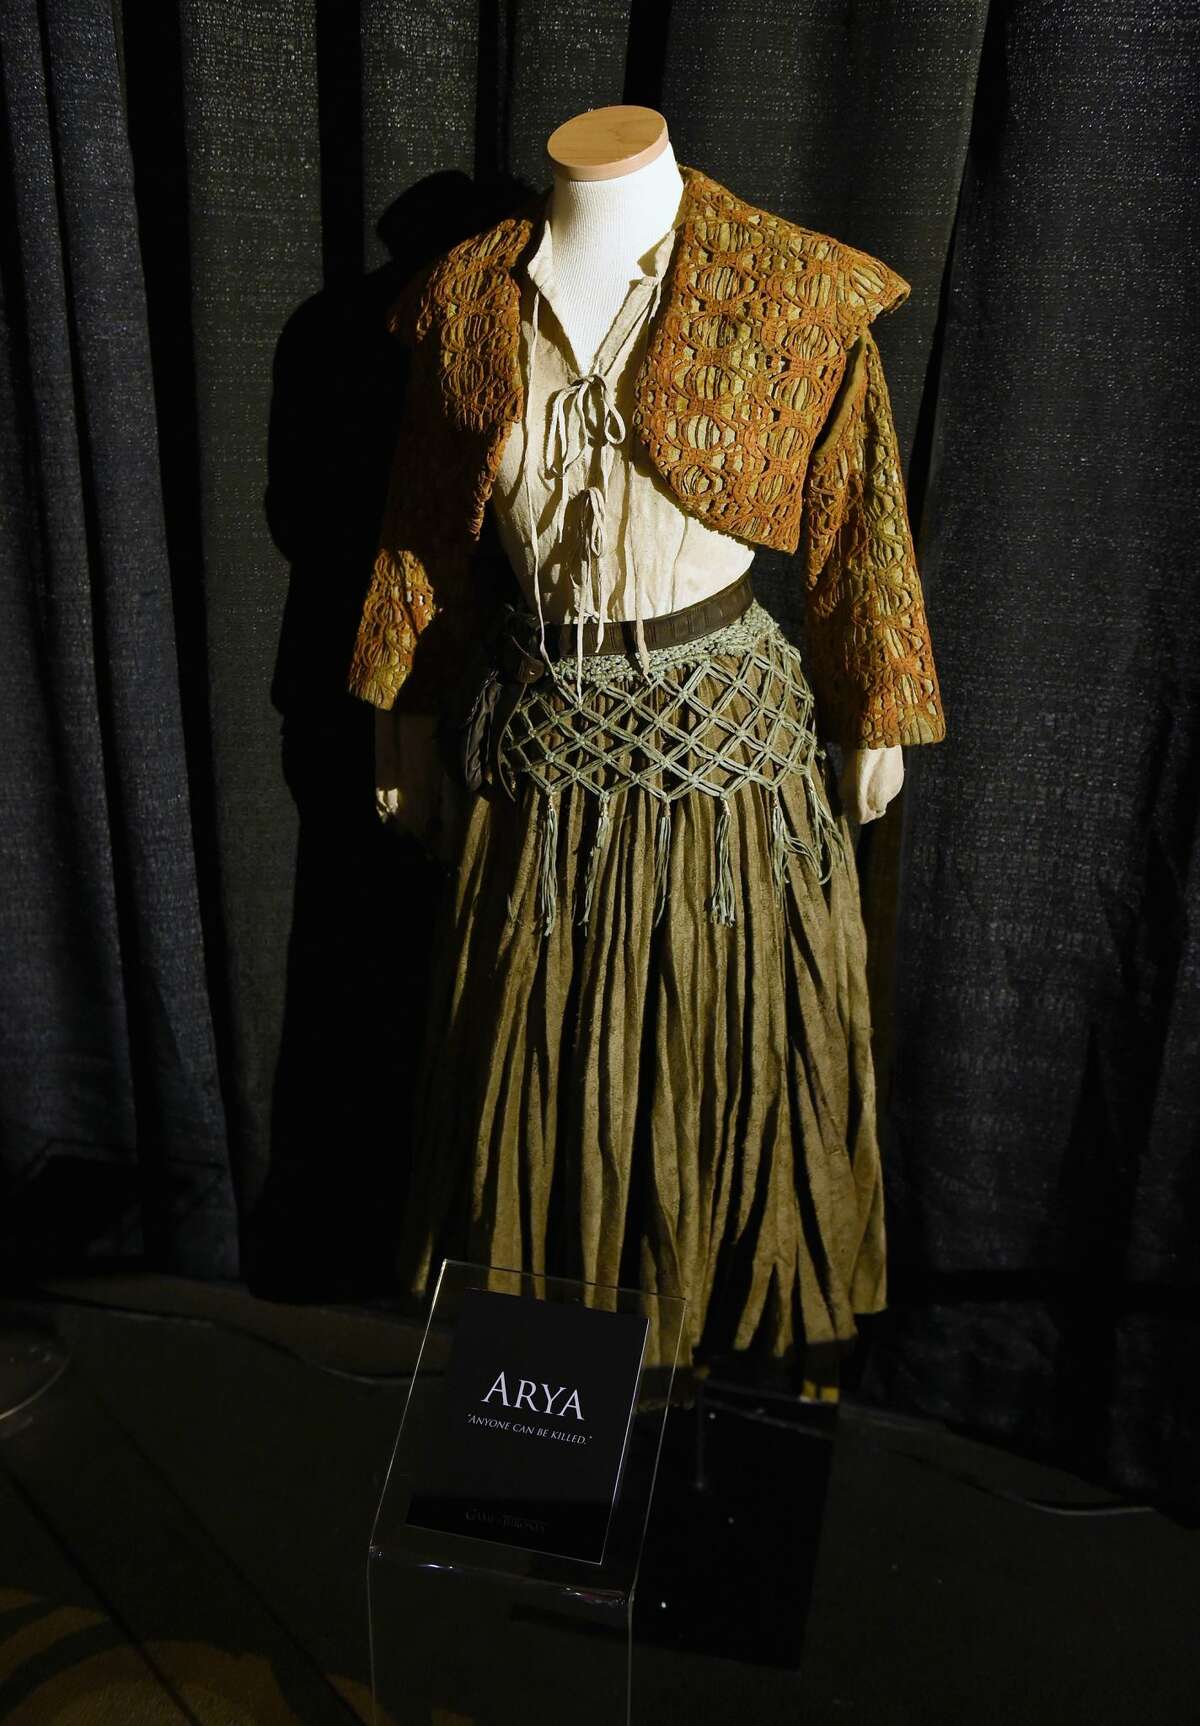 LOS ANGELES, CA - AUGUST 08: An exclusive costume on display during the announcement of the Game of ThronesÂ® Live Concert Experience featuring composer Ramin Djawadi at the Hollywood Palladium on August 8, 2016 in Los Angeles, California. (Photo by Kevin Winter/Getty Images for Live nation Entertainment )